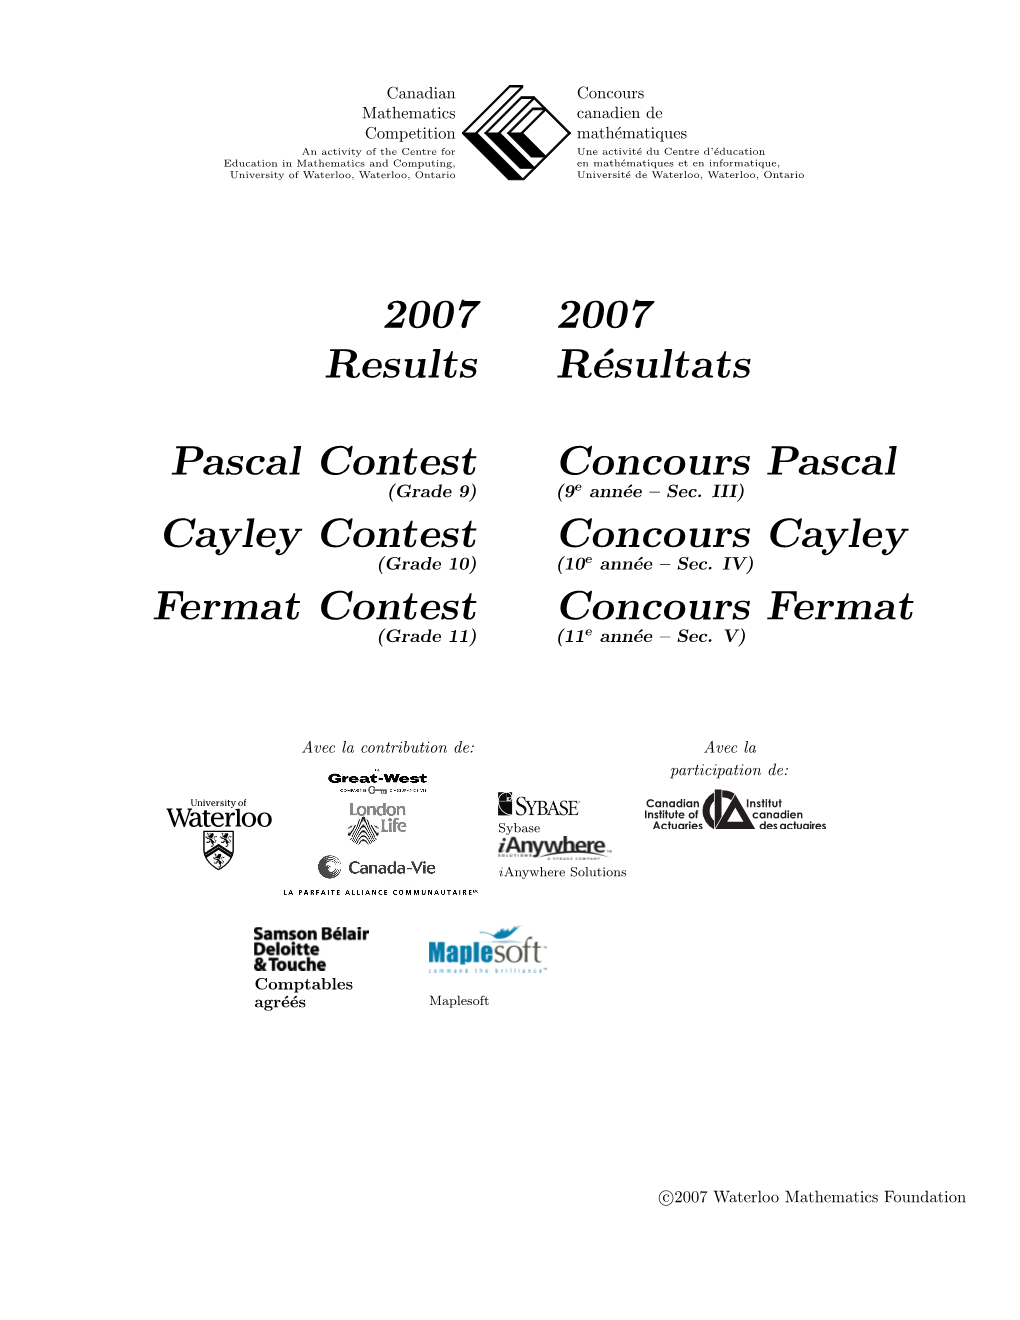 Pascal 2007 Results